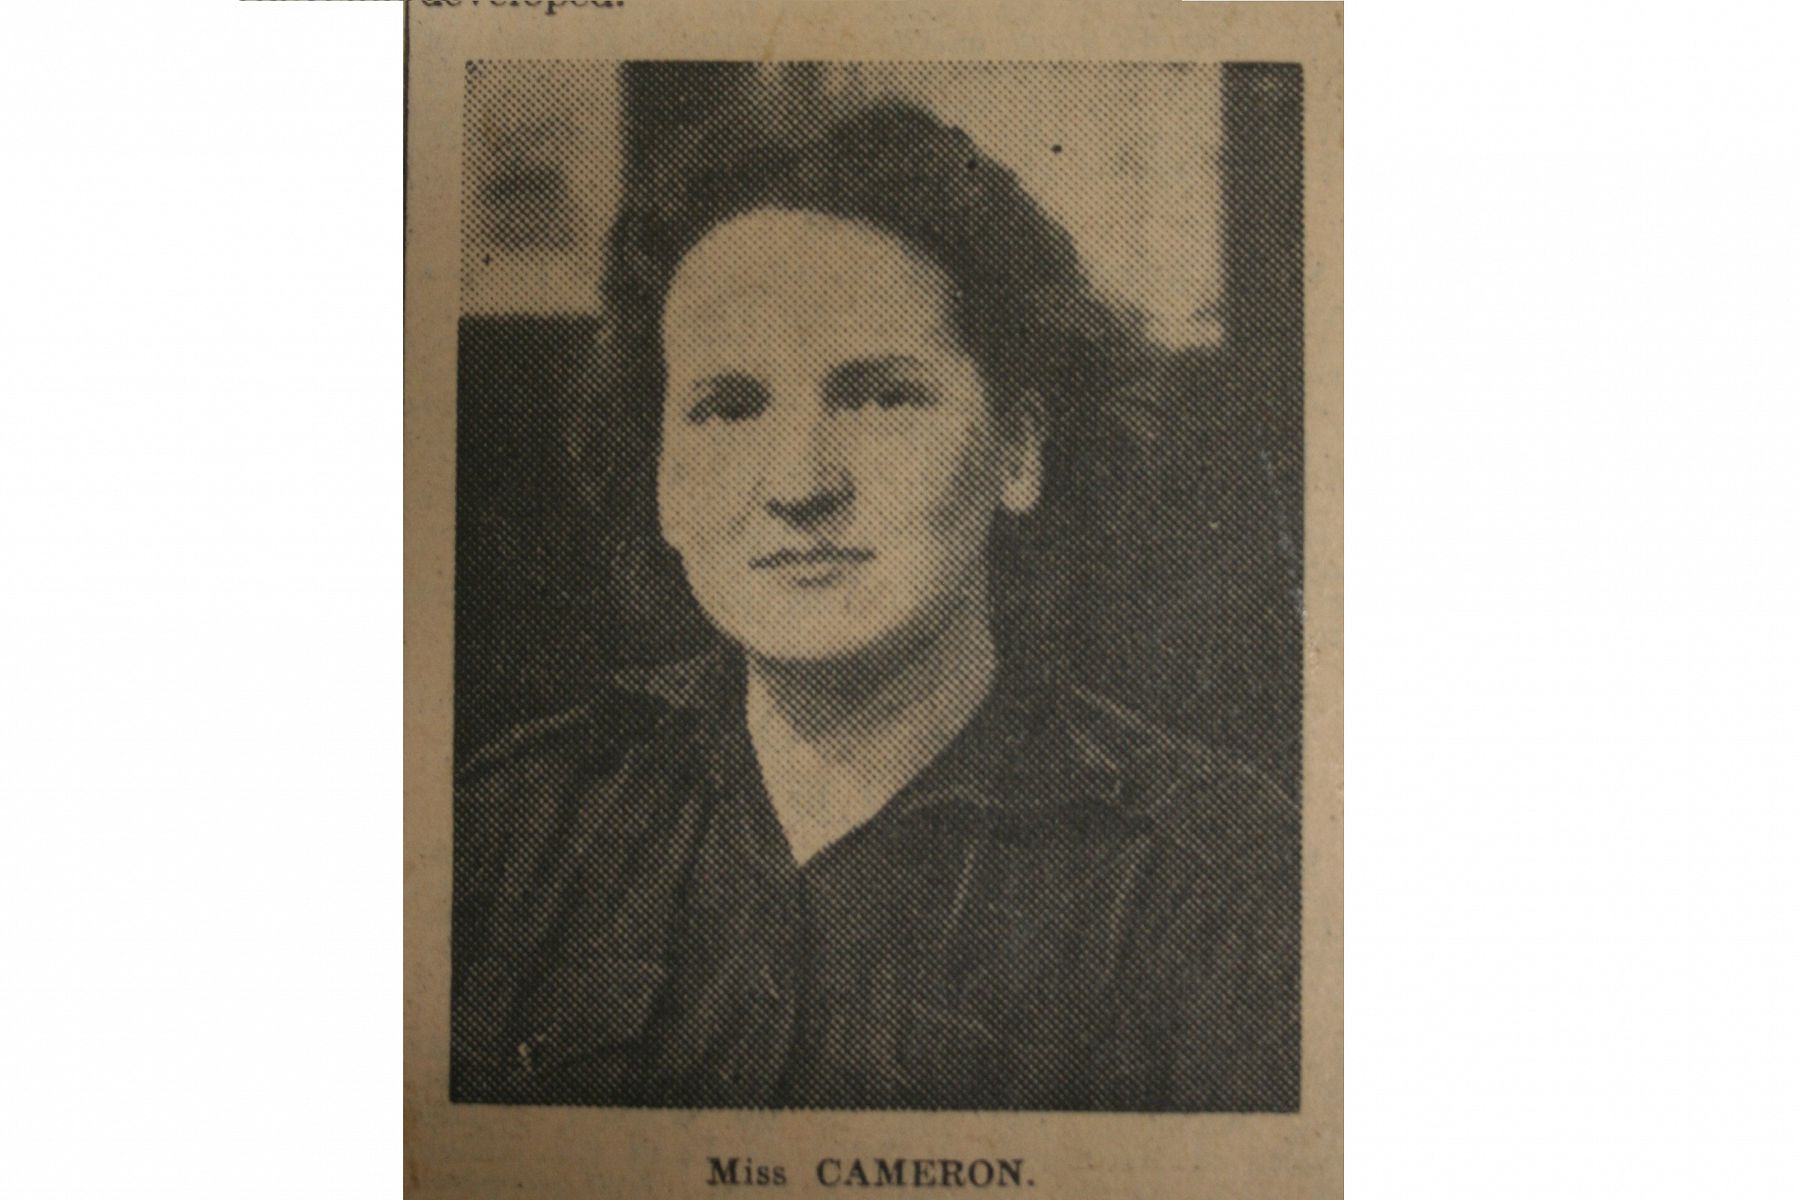 Margaret Cameron, female former student of Dundee Technical College (Abertay University). Black and White photograph from the courier 